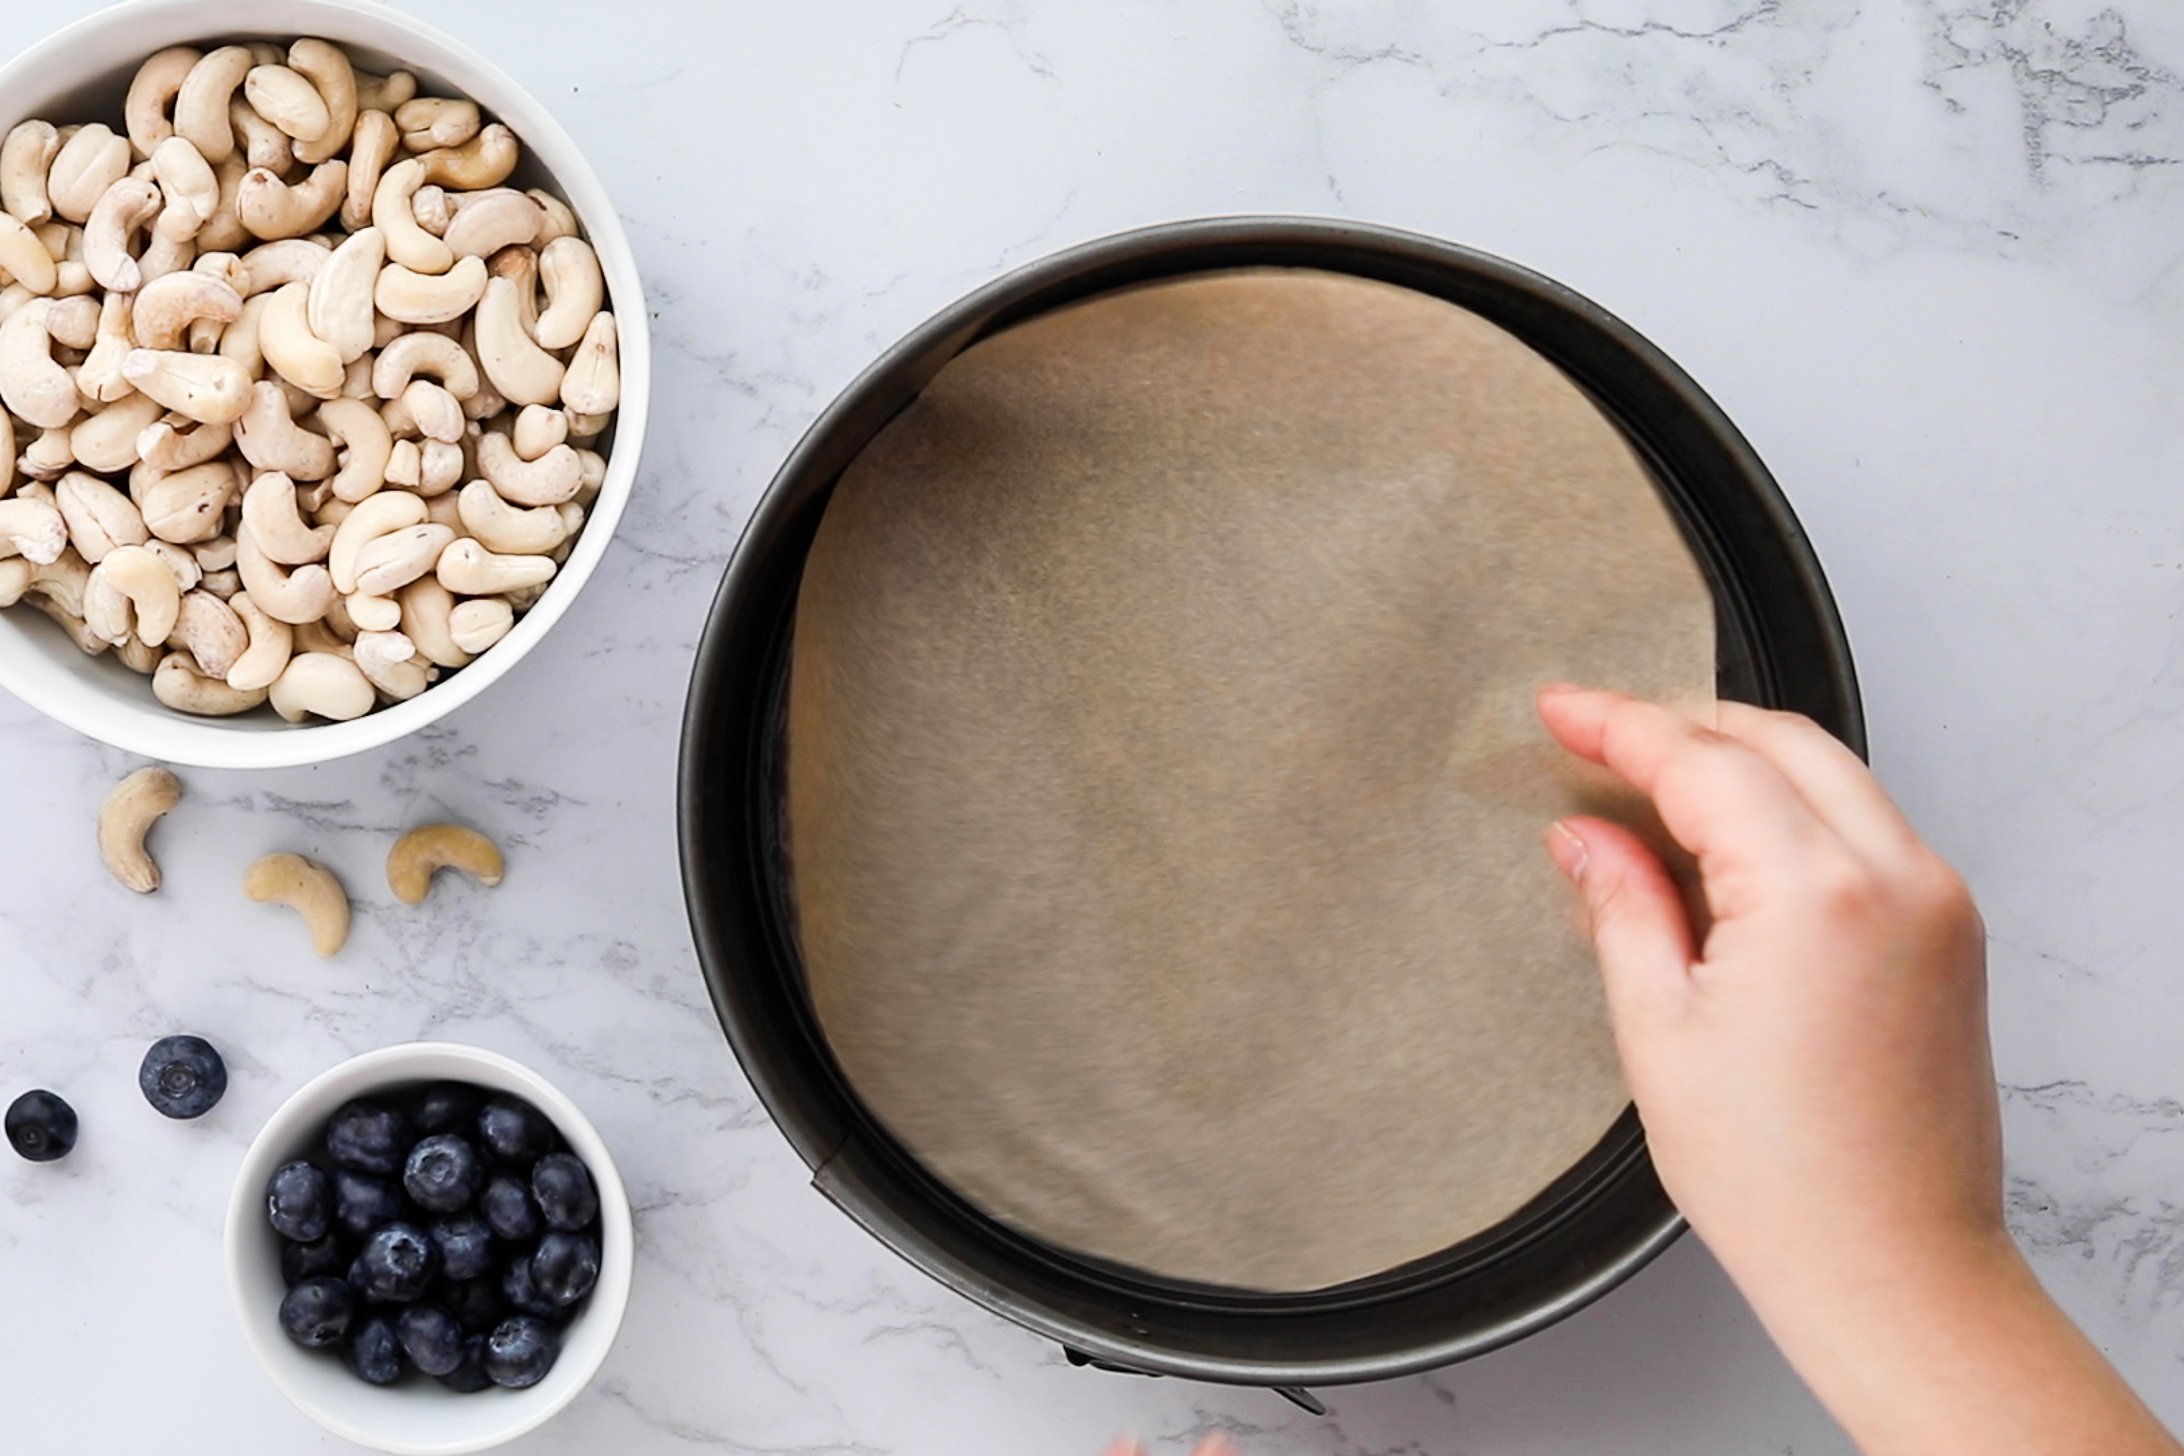 Hand placing a circular parchment paper into a cake pan with cashews and berries placed nearby.